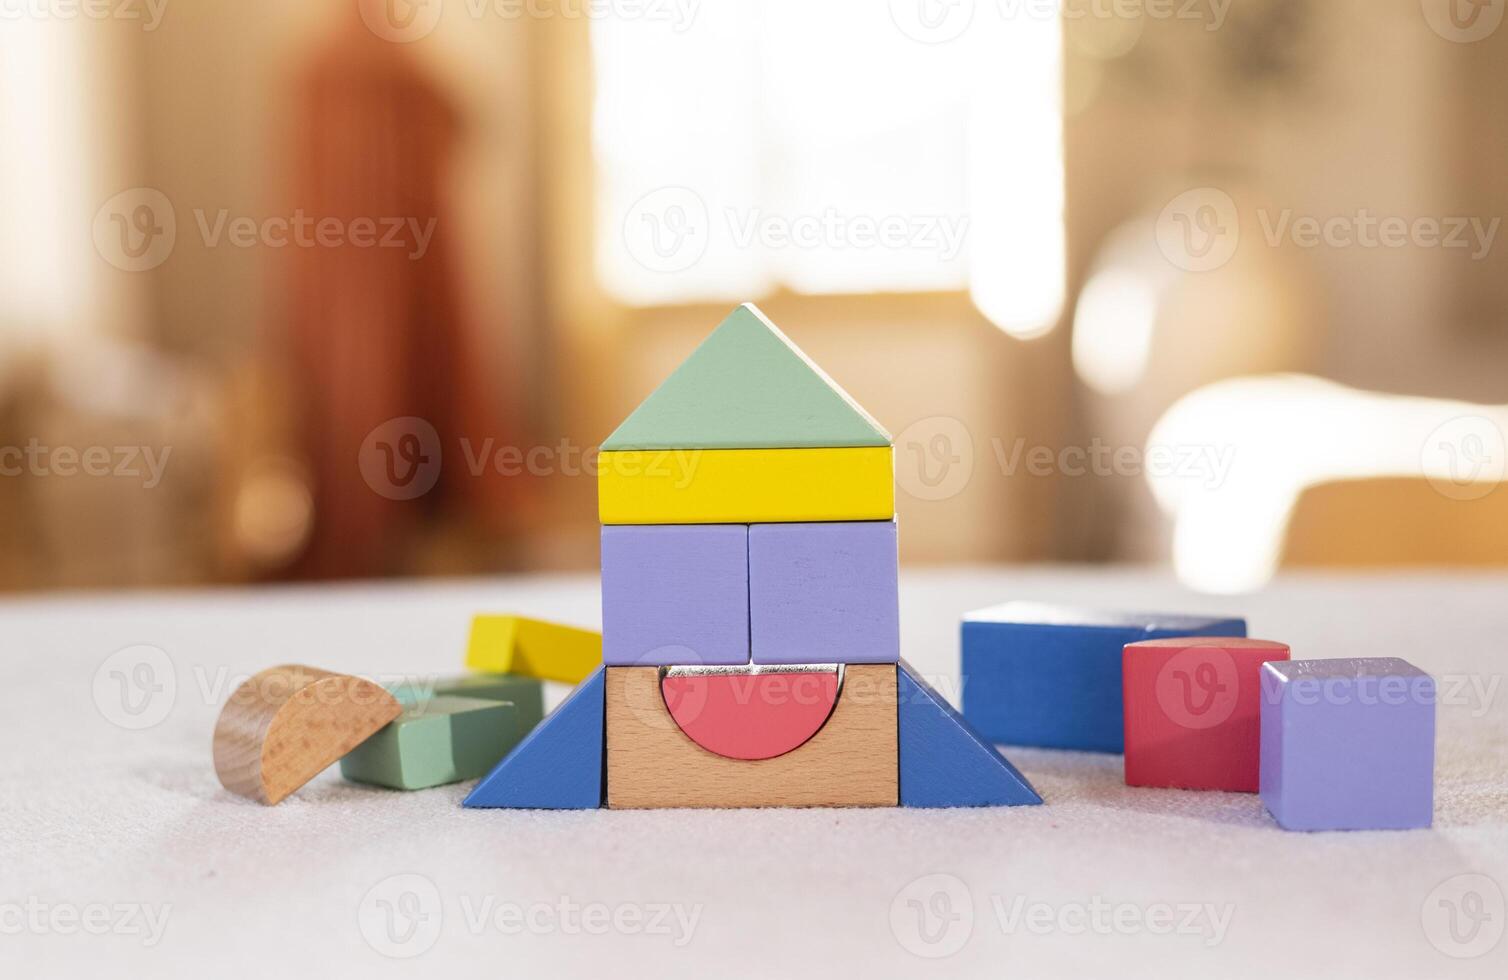 Colorful wooden blocks on home table. Creativity toys. Children building blocks. Geometric shapes - circle, triangle, square, rectangle. The concept of logical thinking. photo